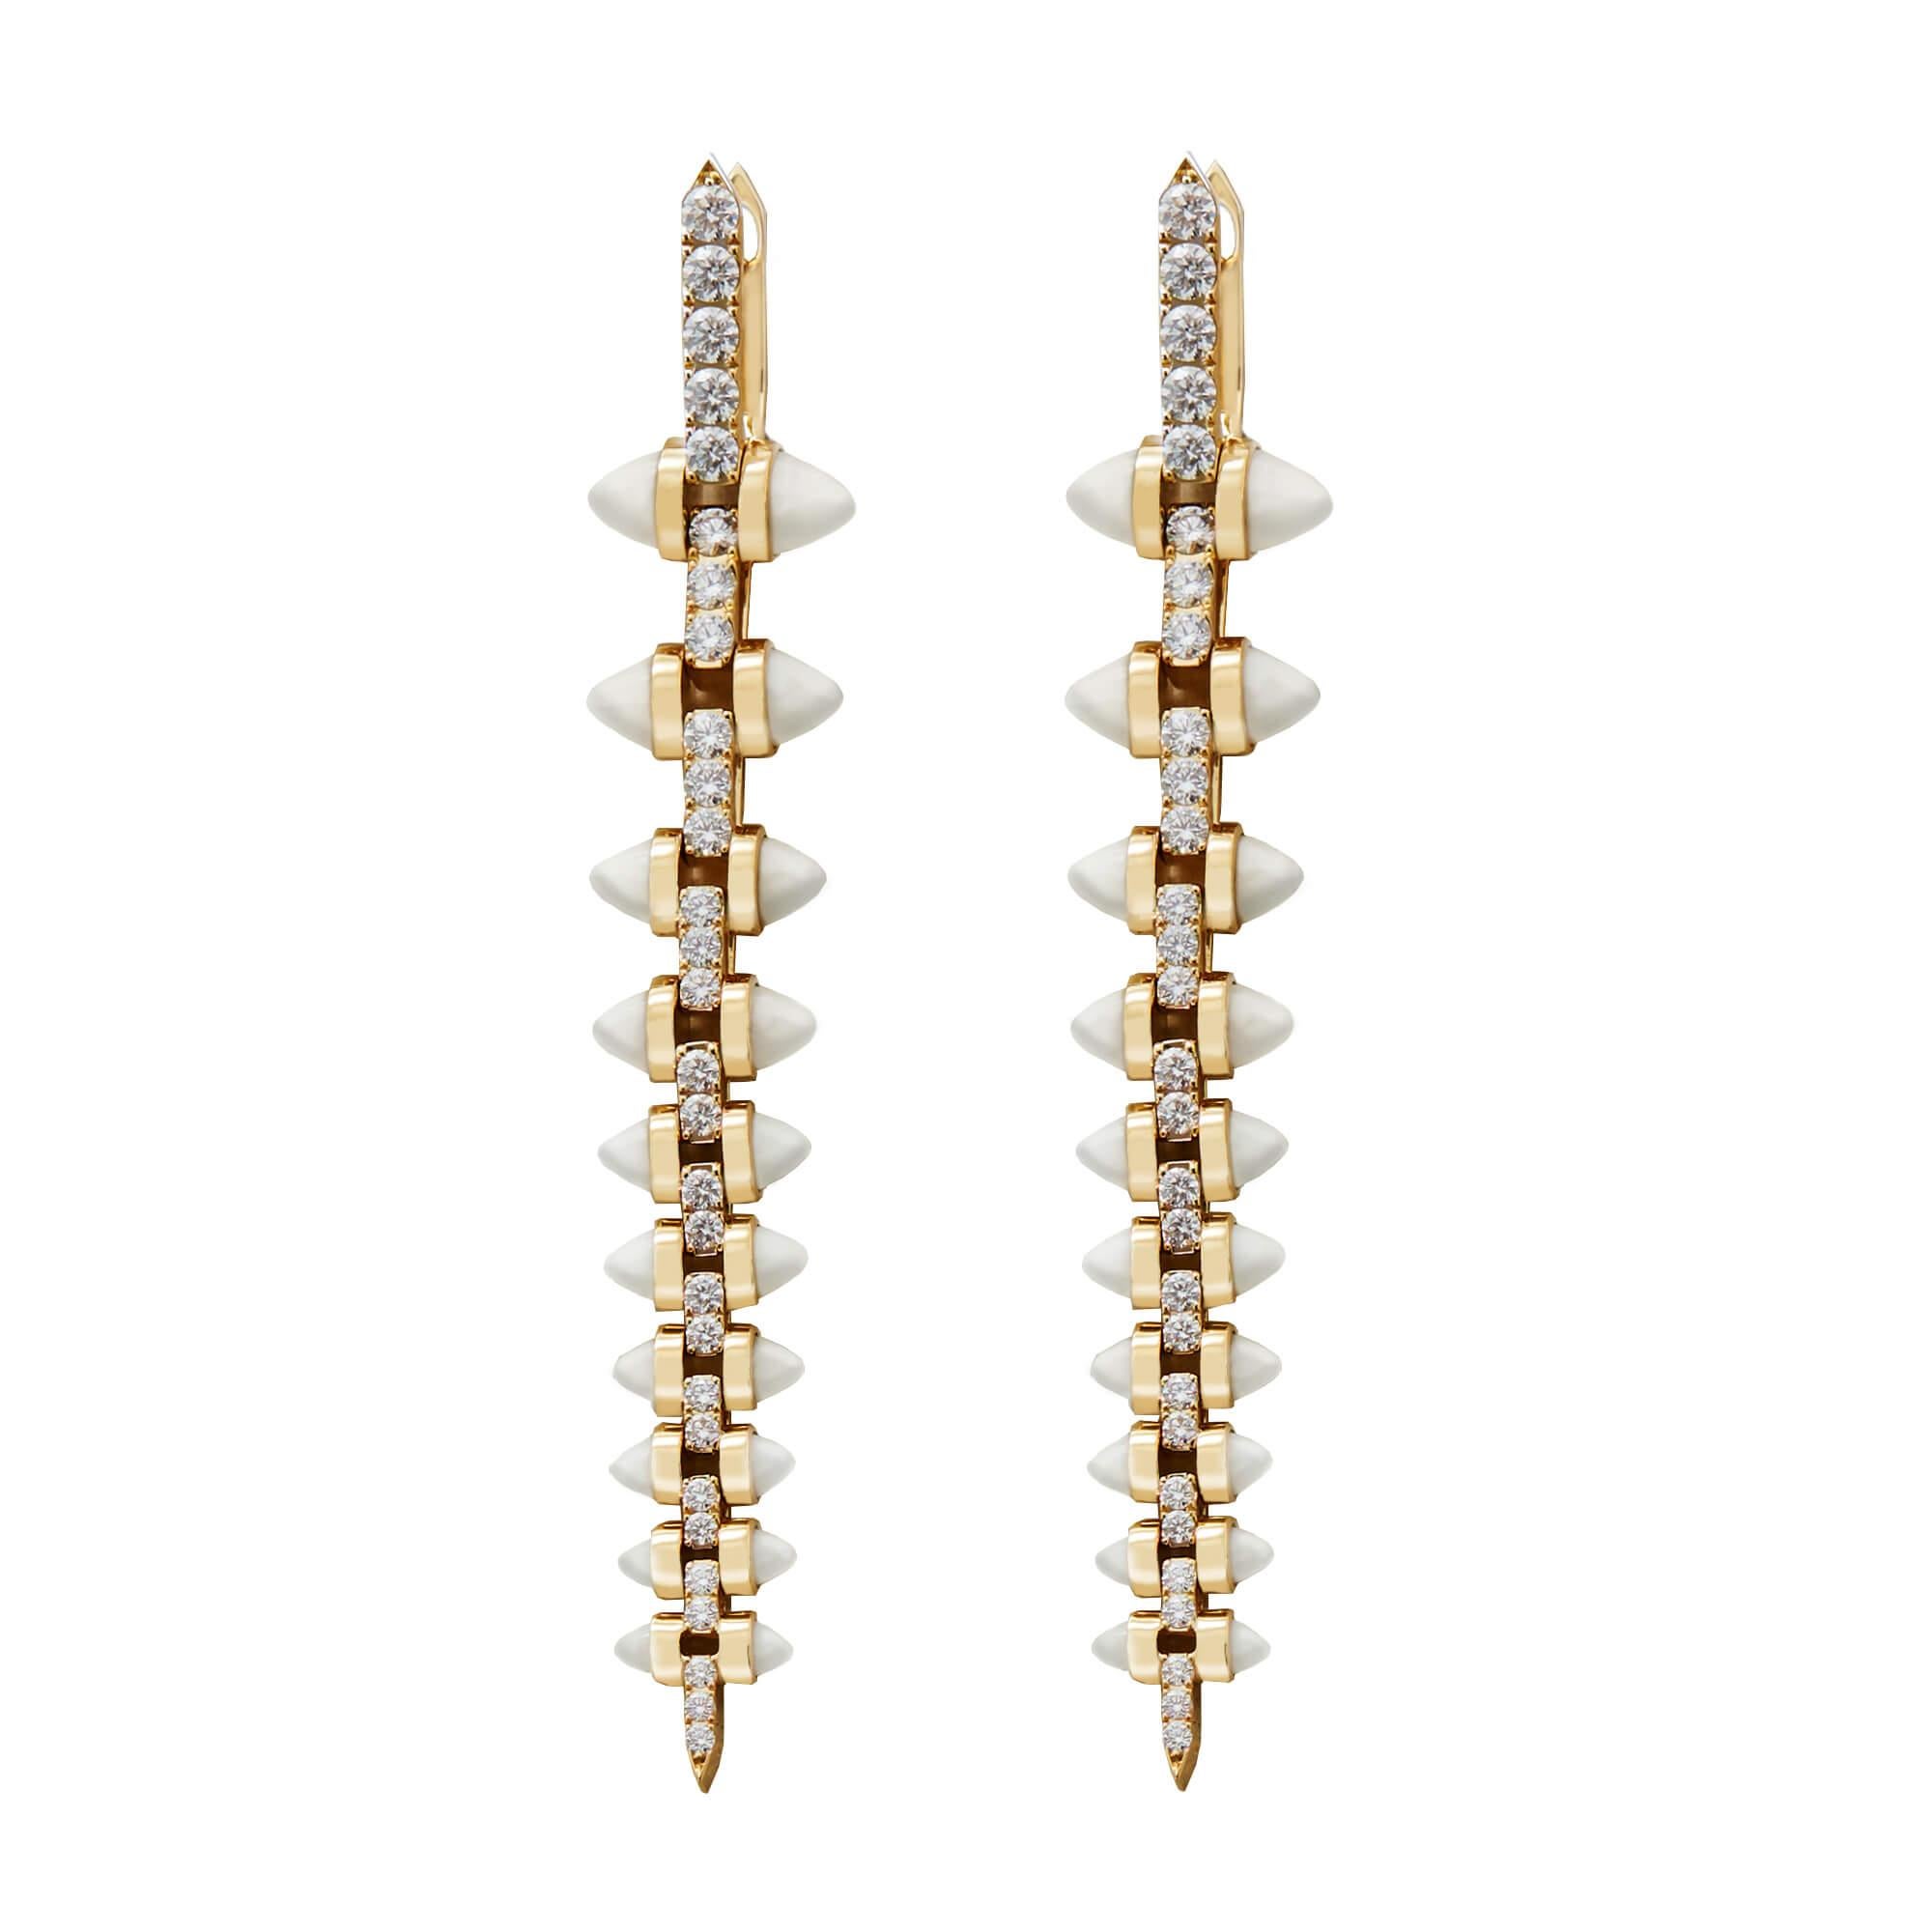 Stephen Webster Russian Roulette Mother of Pearl and Diamond Stiletto Earrings